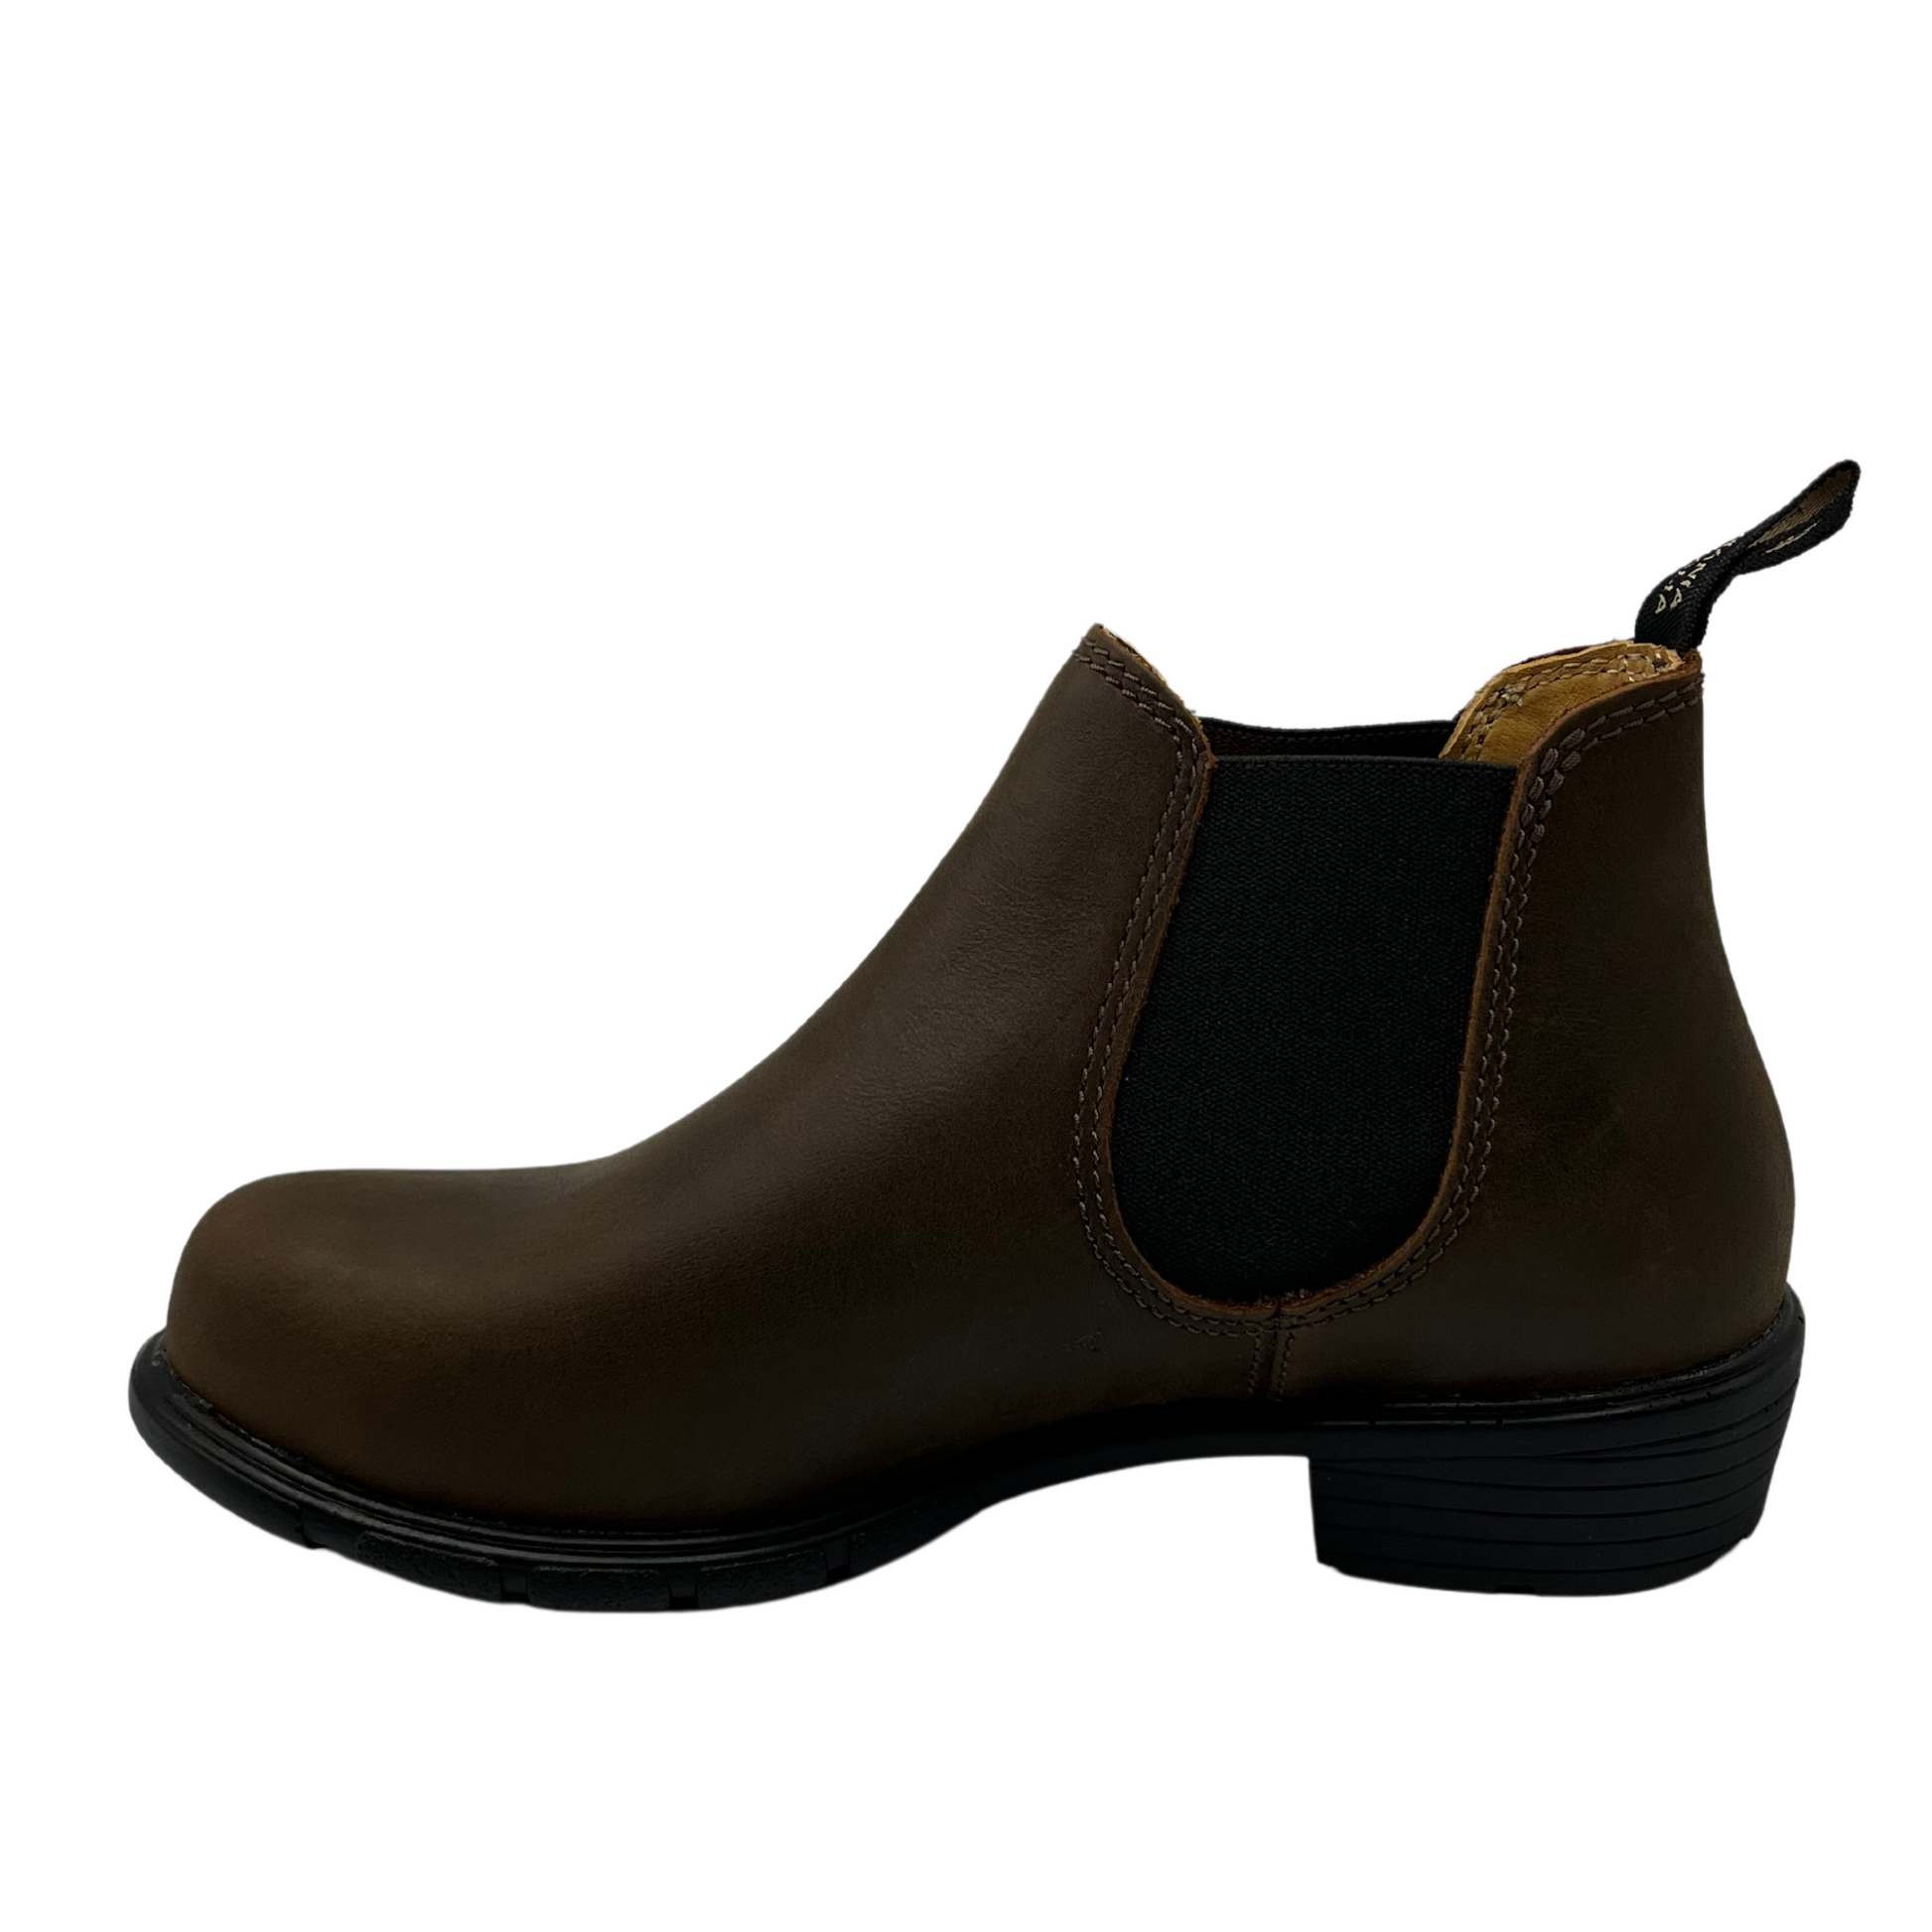 Left facing view of brown leather ankle boot with elastic side gore